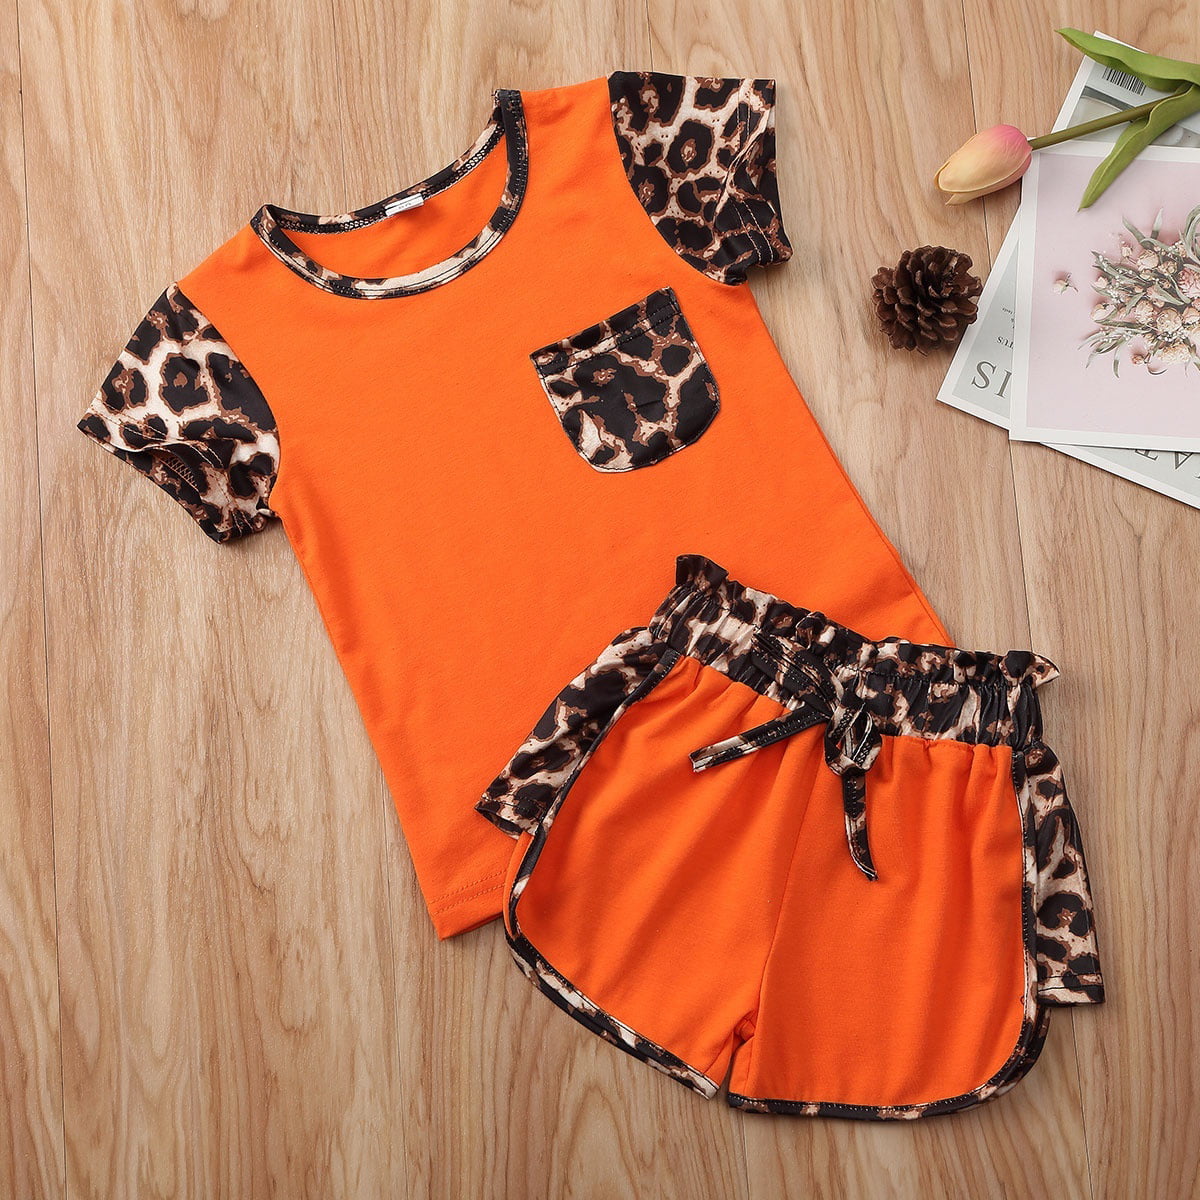 Toddler Girl Clothes Short Sleeve Tops Leopard Pants Baby Boy Outfits Set